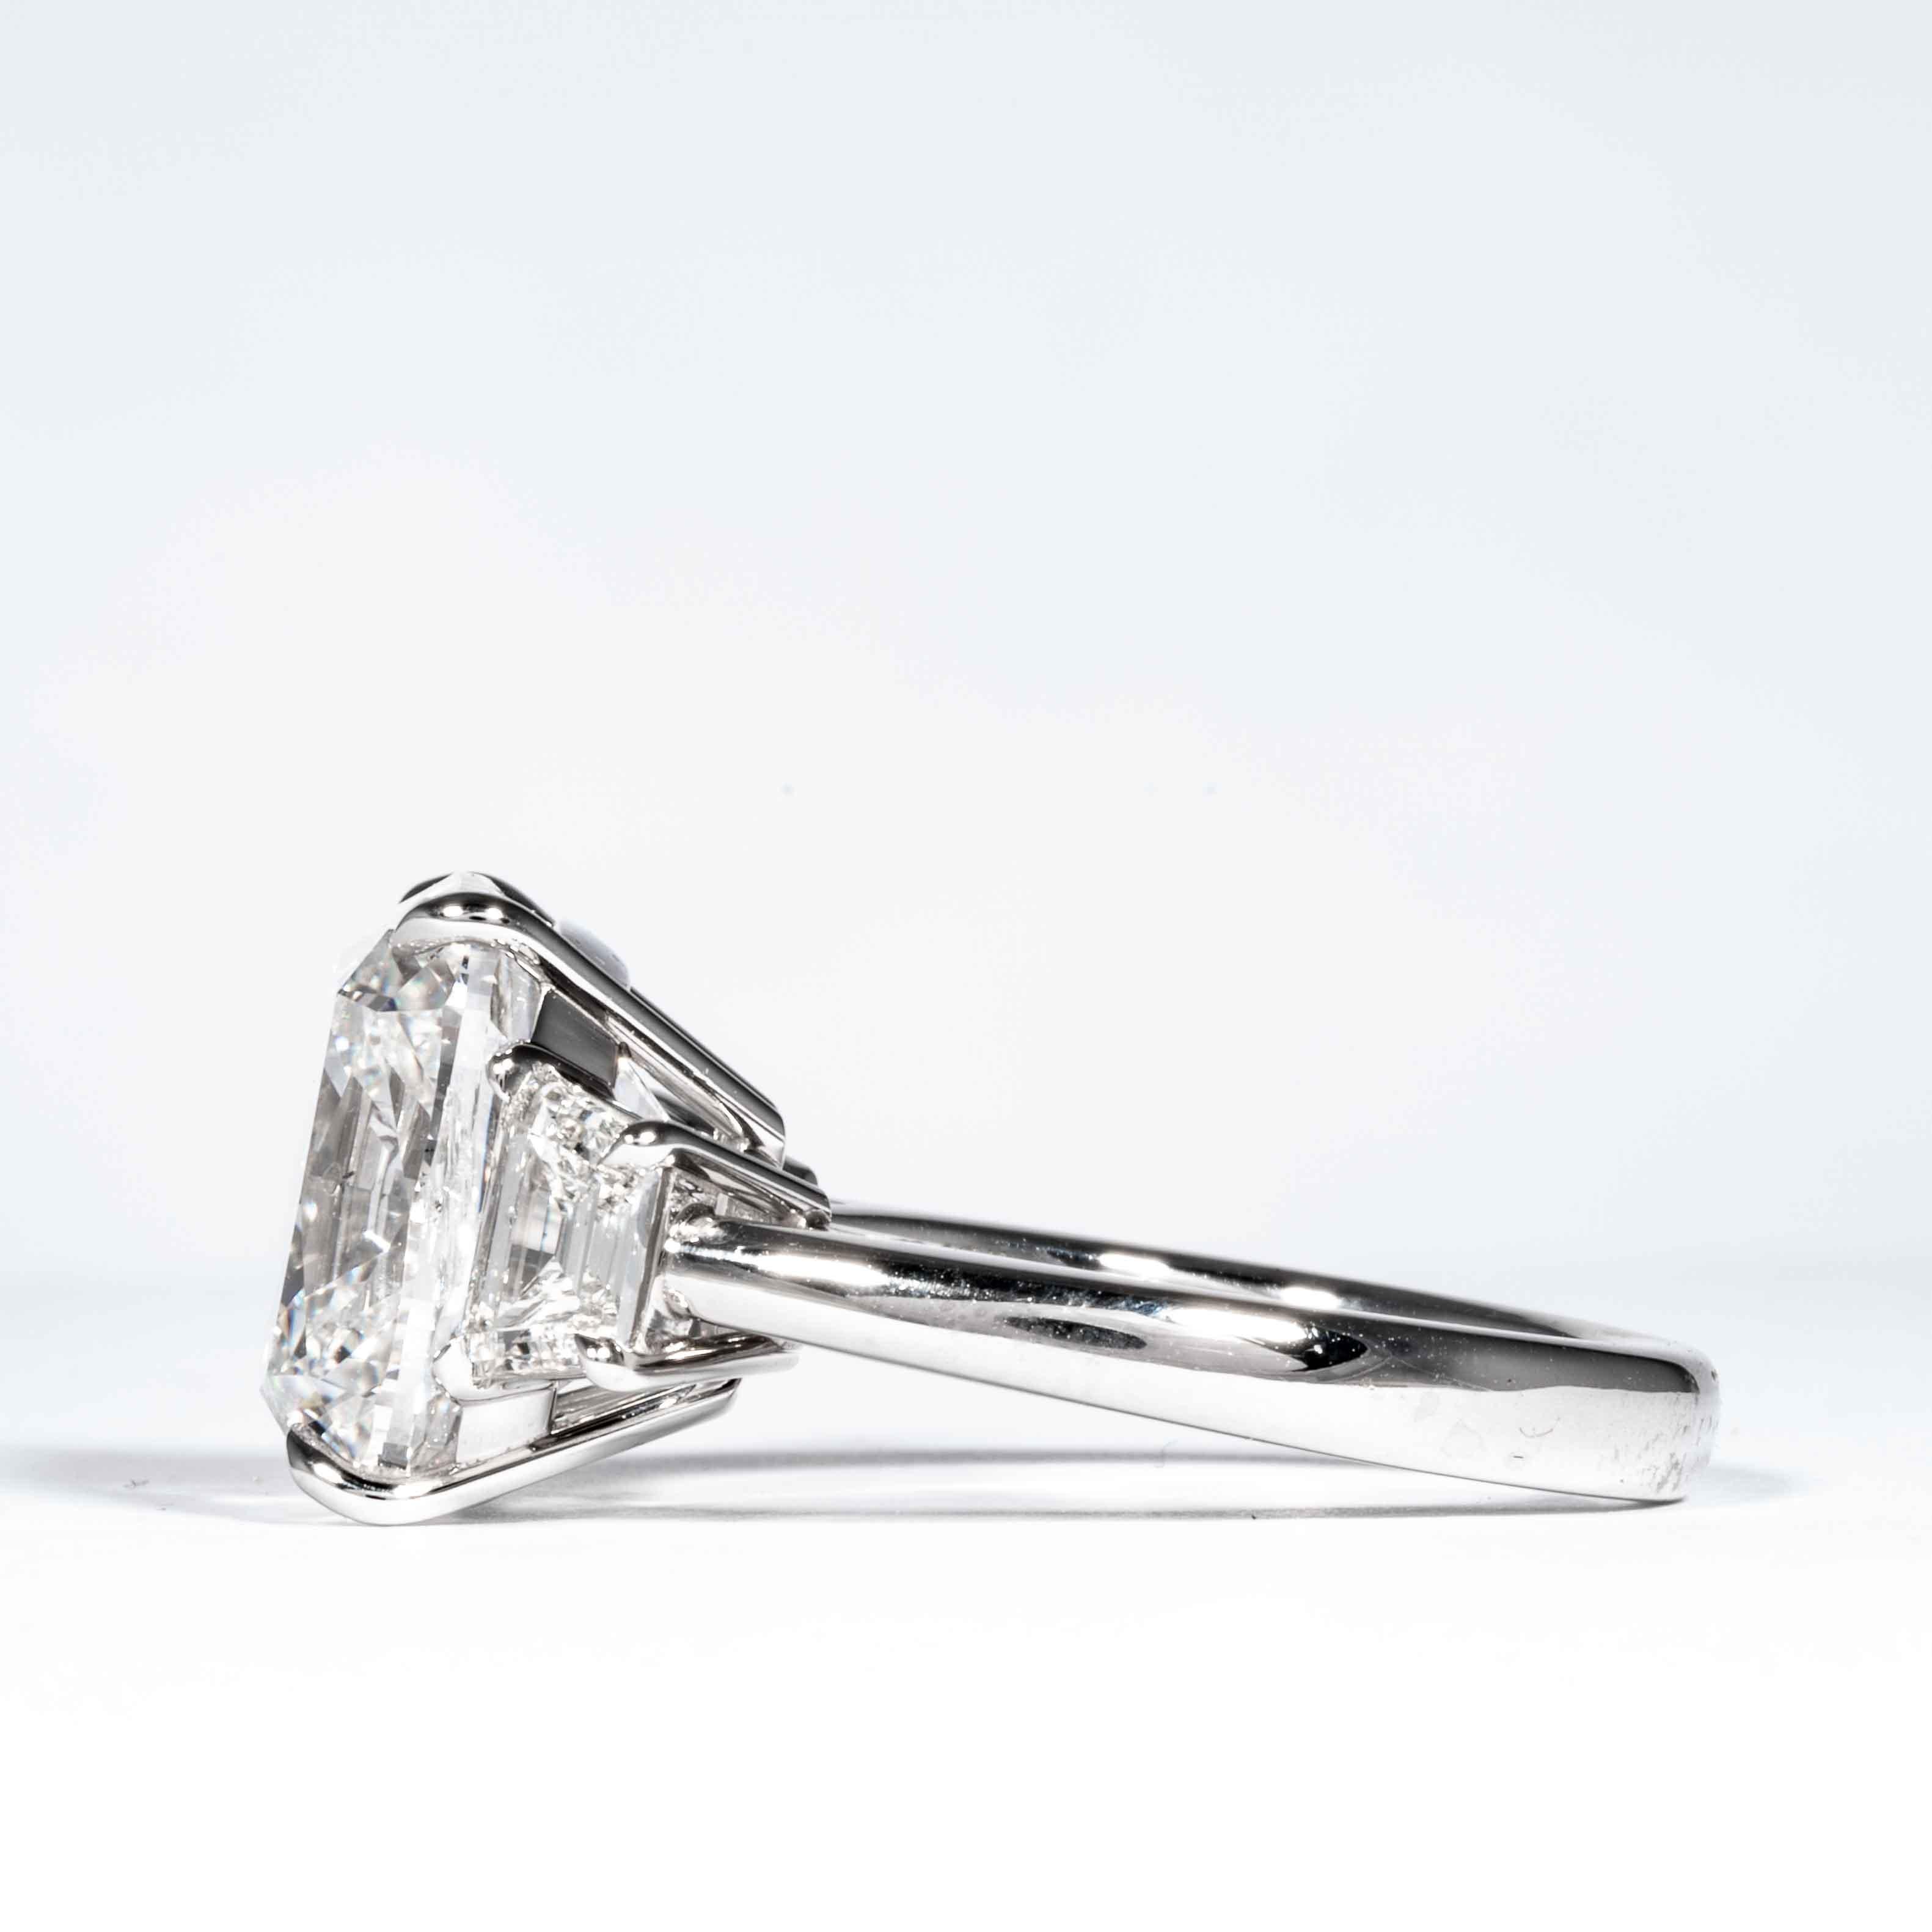 Shreve, Crump & Low GIA Certified 10.01 Carat G SI1 Cushion Cut Diamond Ring In New Condition For Sale In Boston, MA